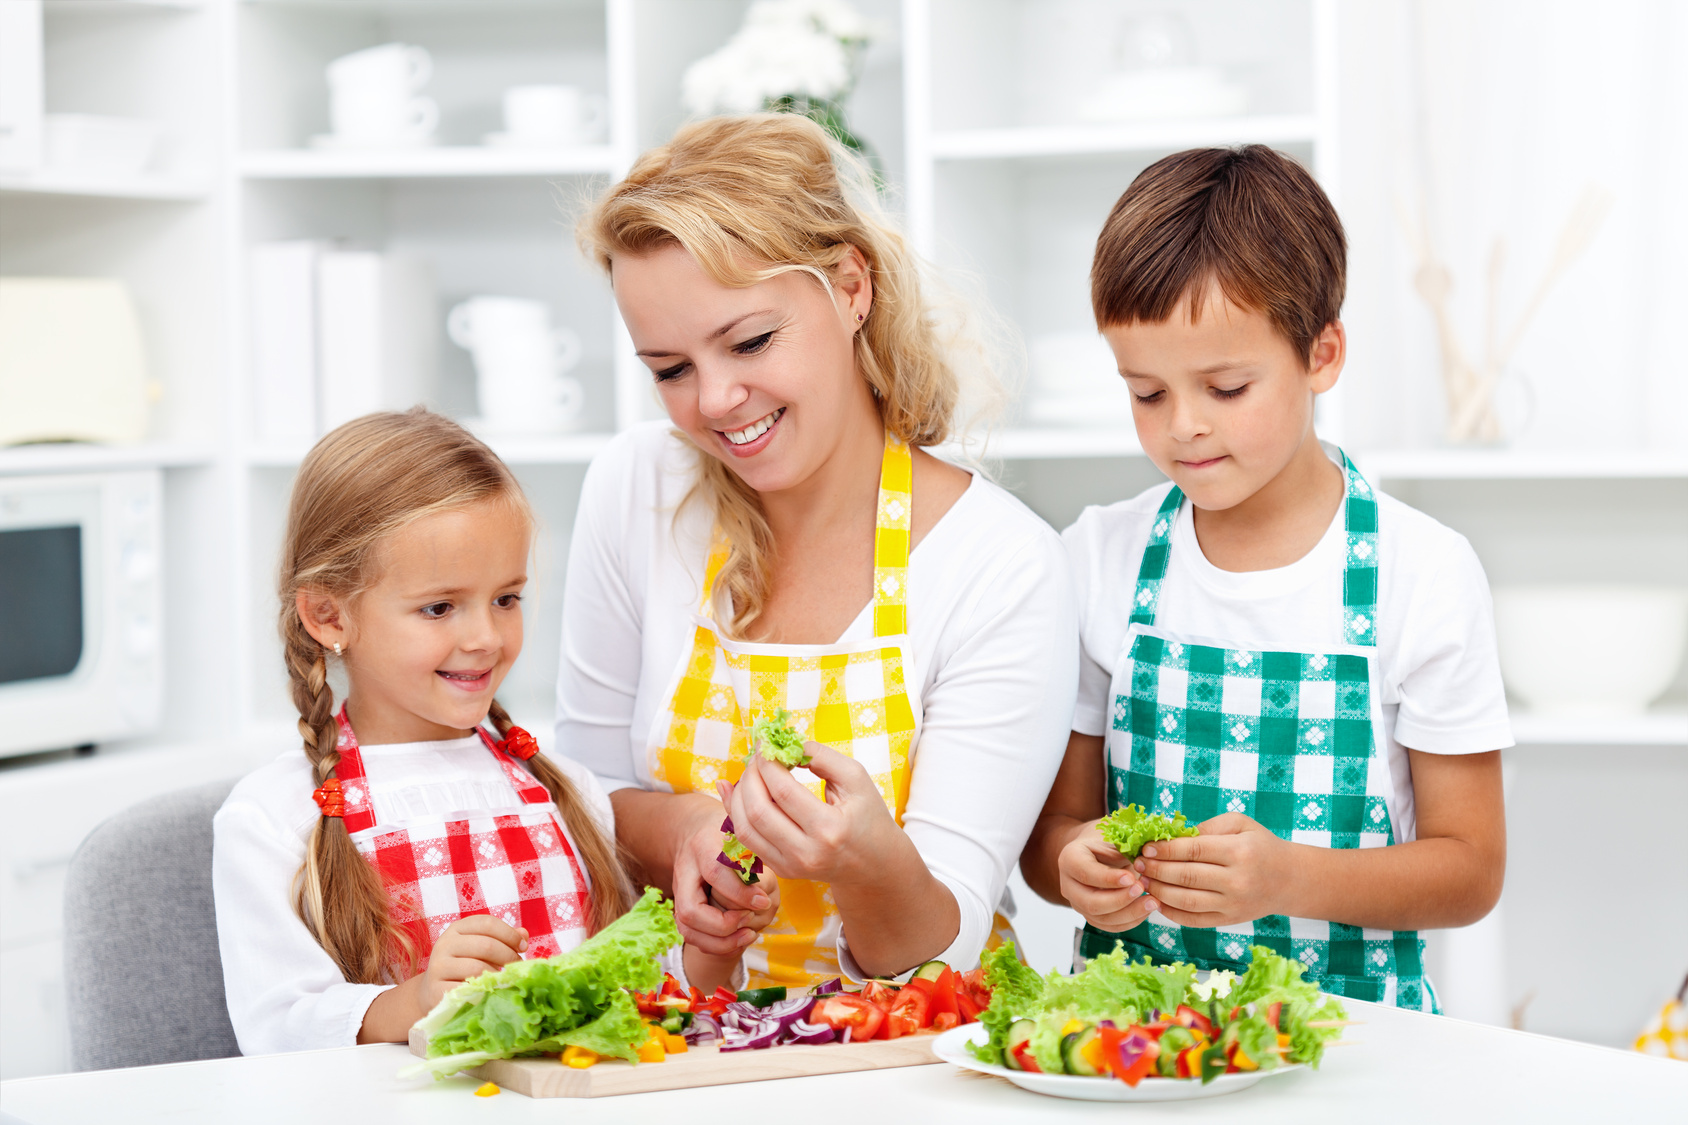 Salad time with the kids in the kitchen - healthy life education